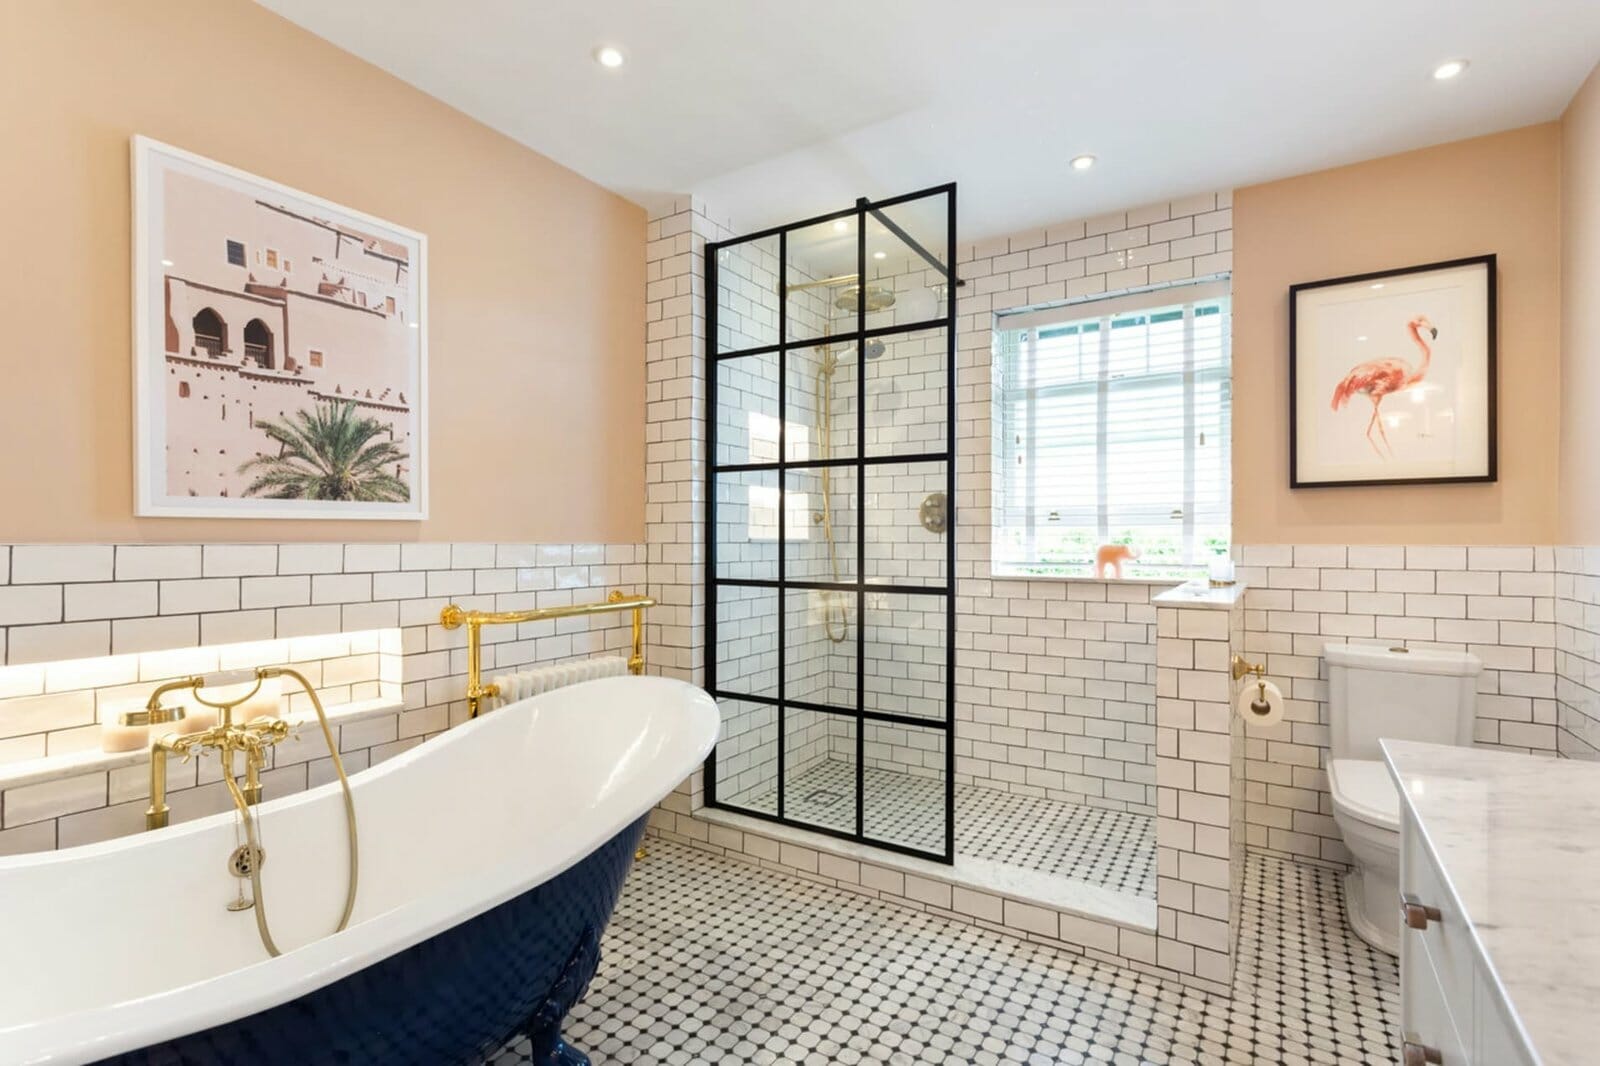 20 Bathroom Tile Ideas You Ll Want To, What Size Tile For Small Bathroom Shower